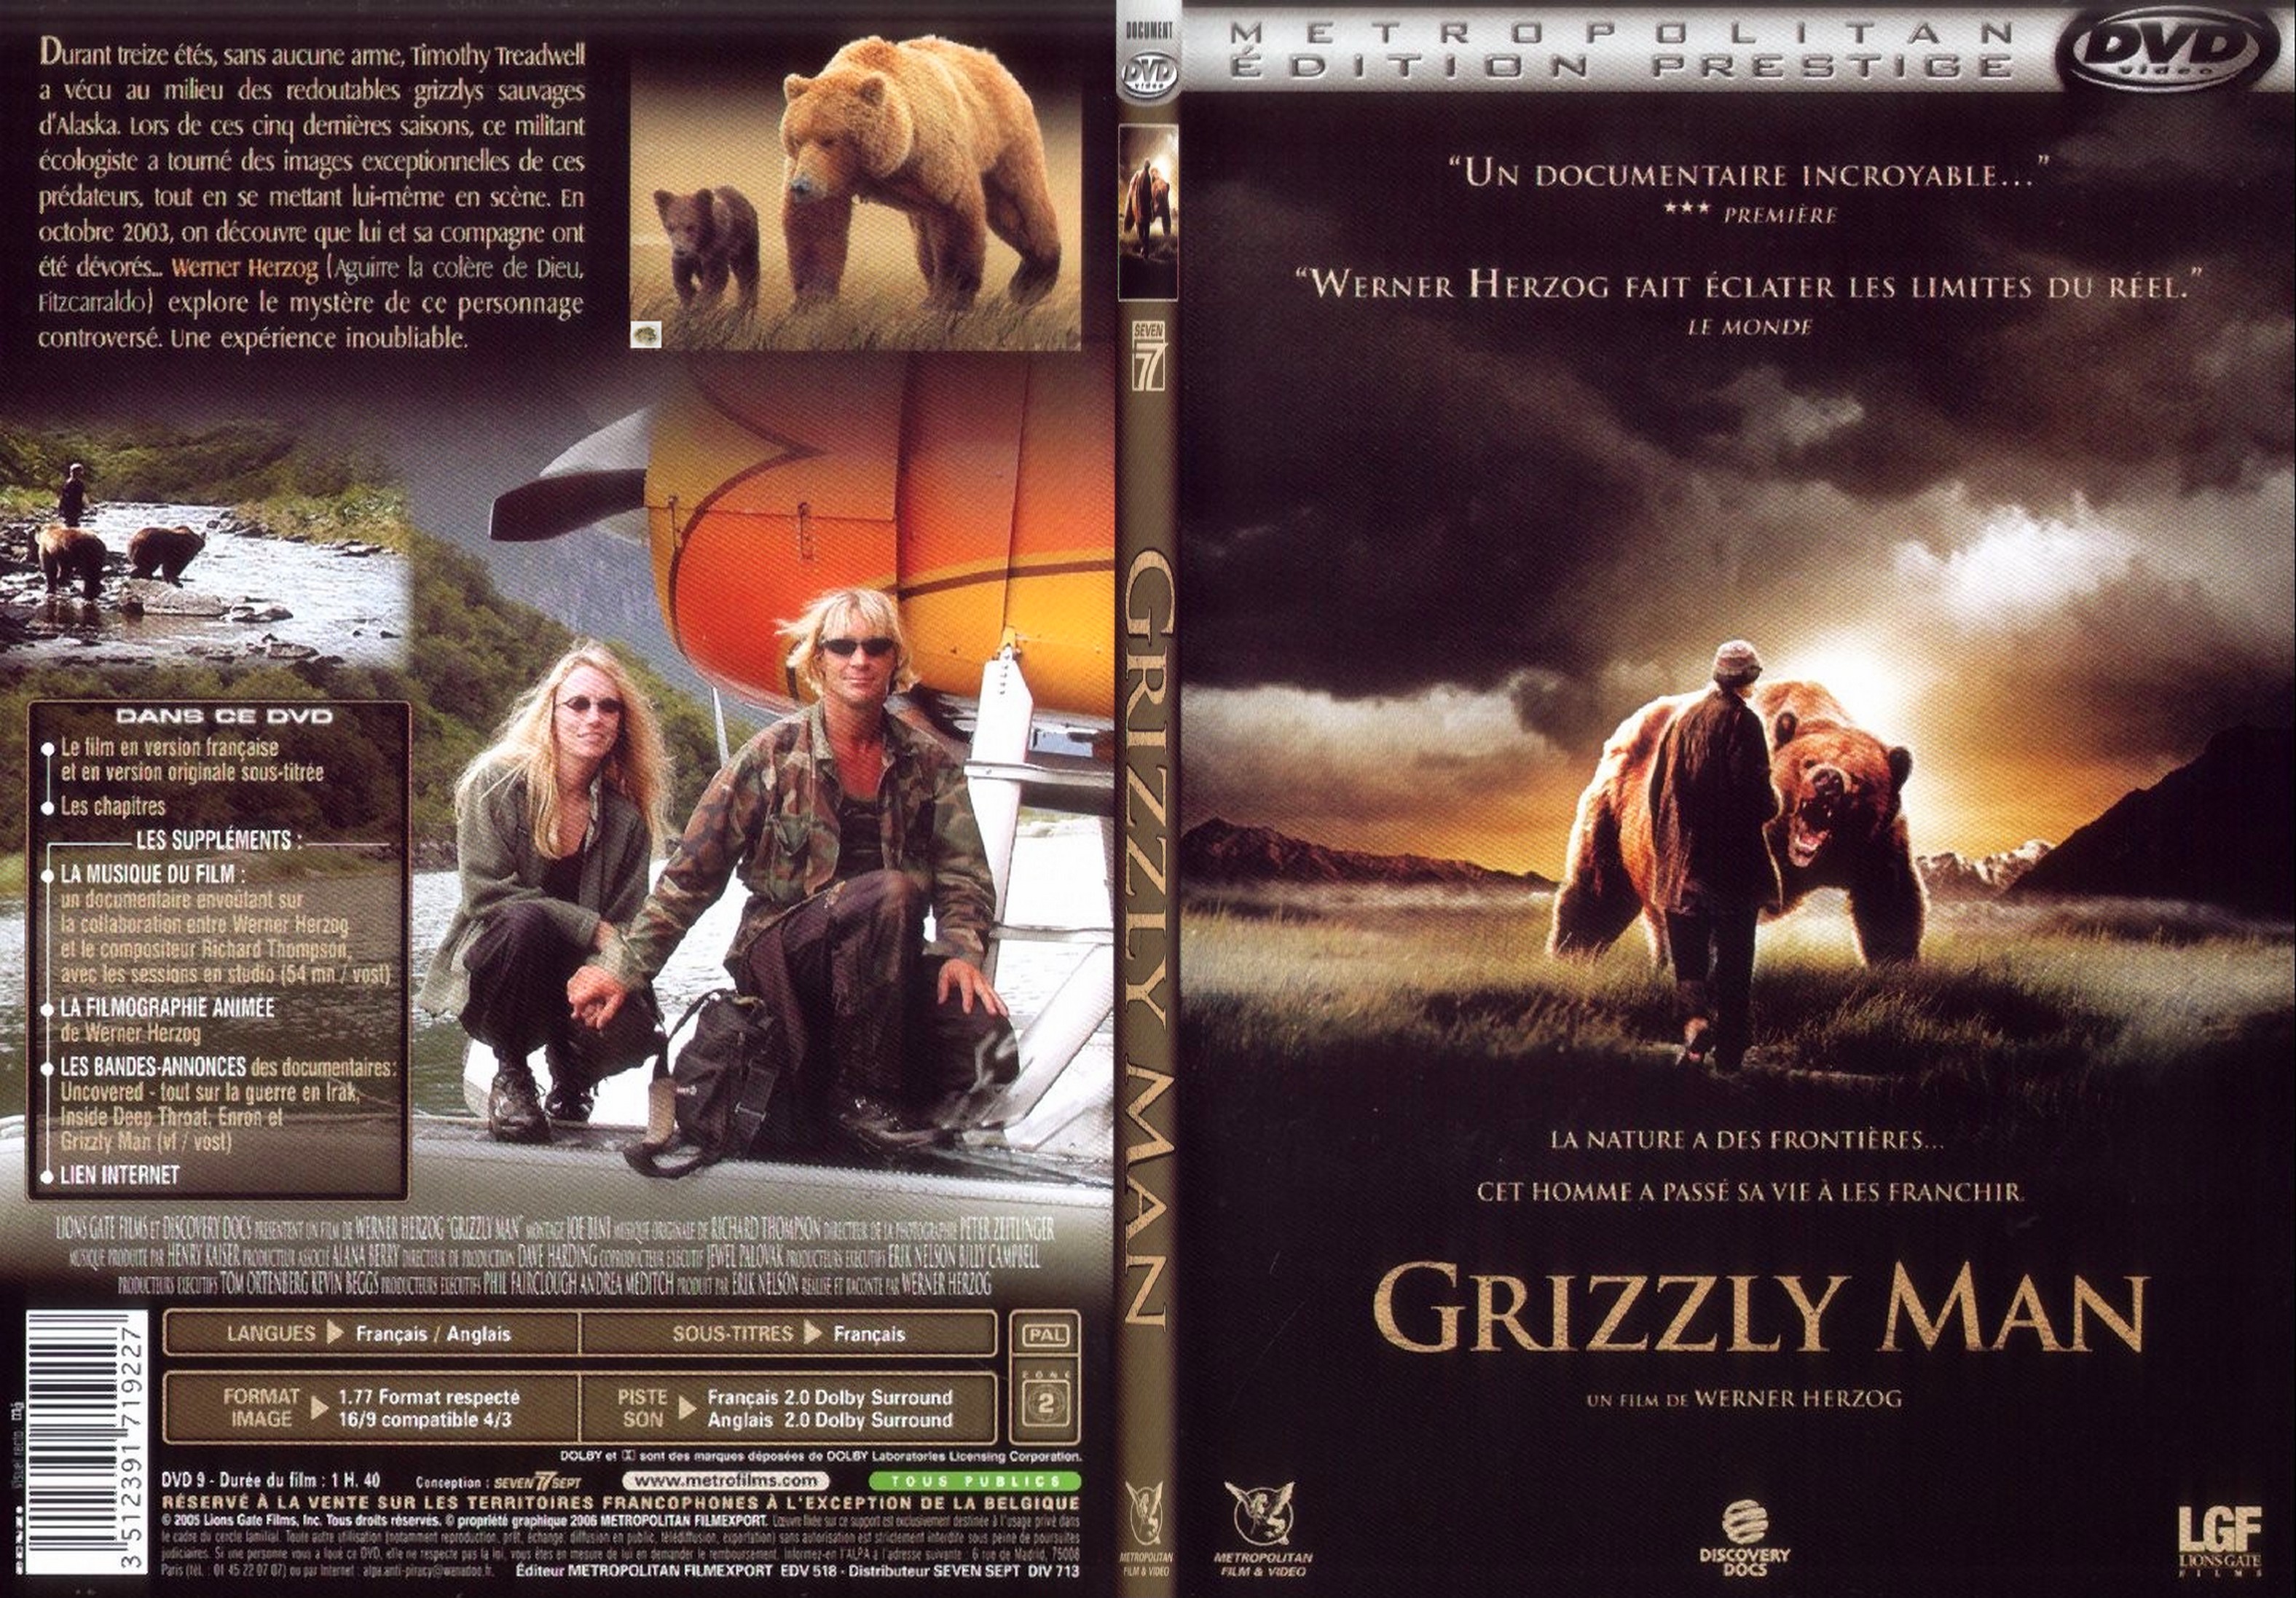 Jaquette DVD Grizzly man - SLIM